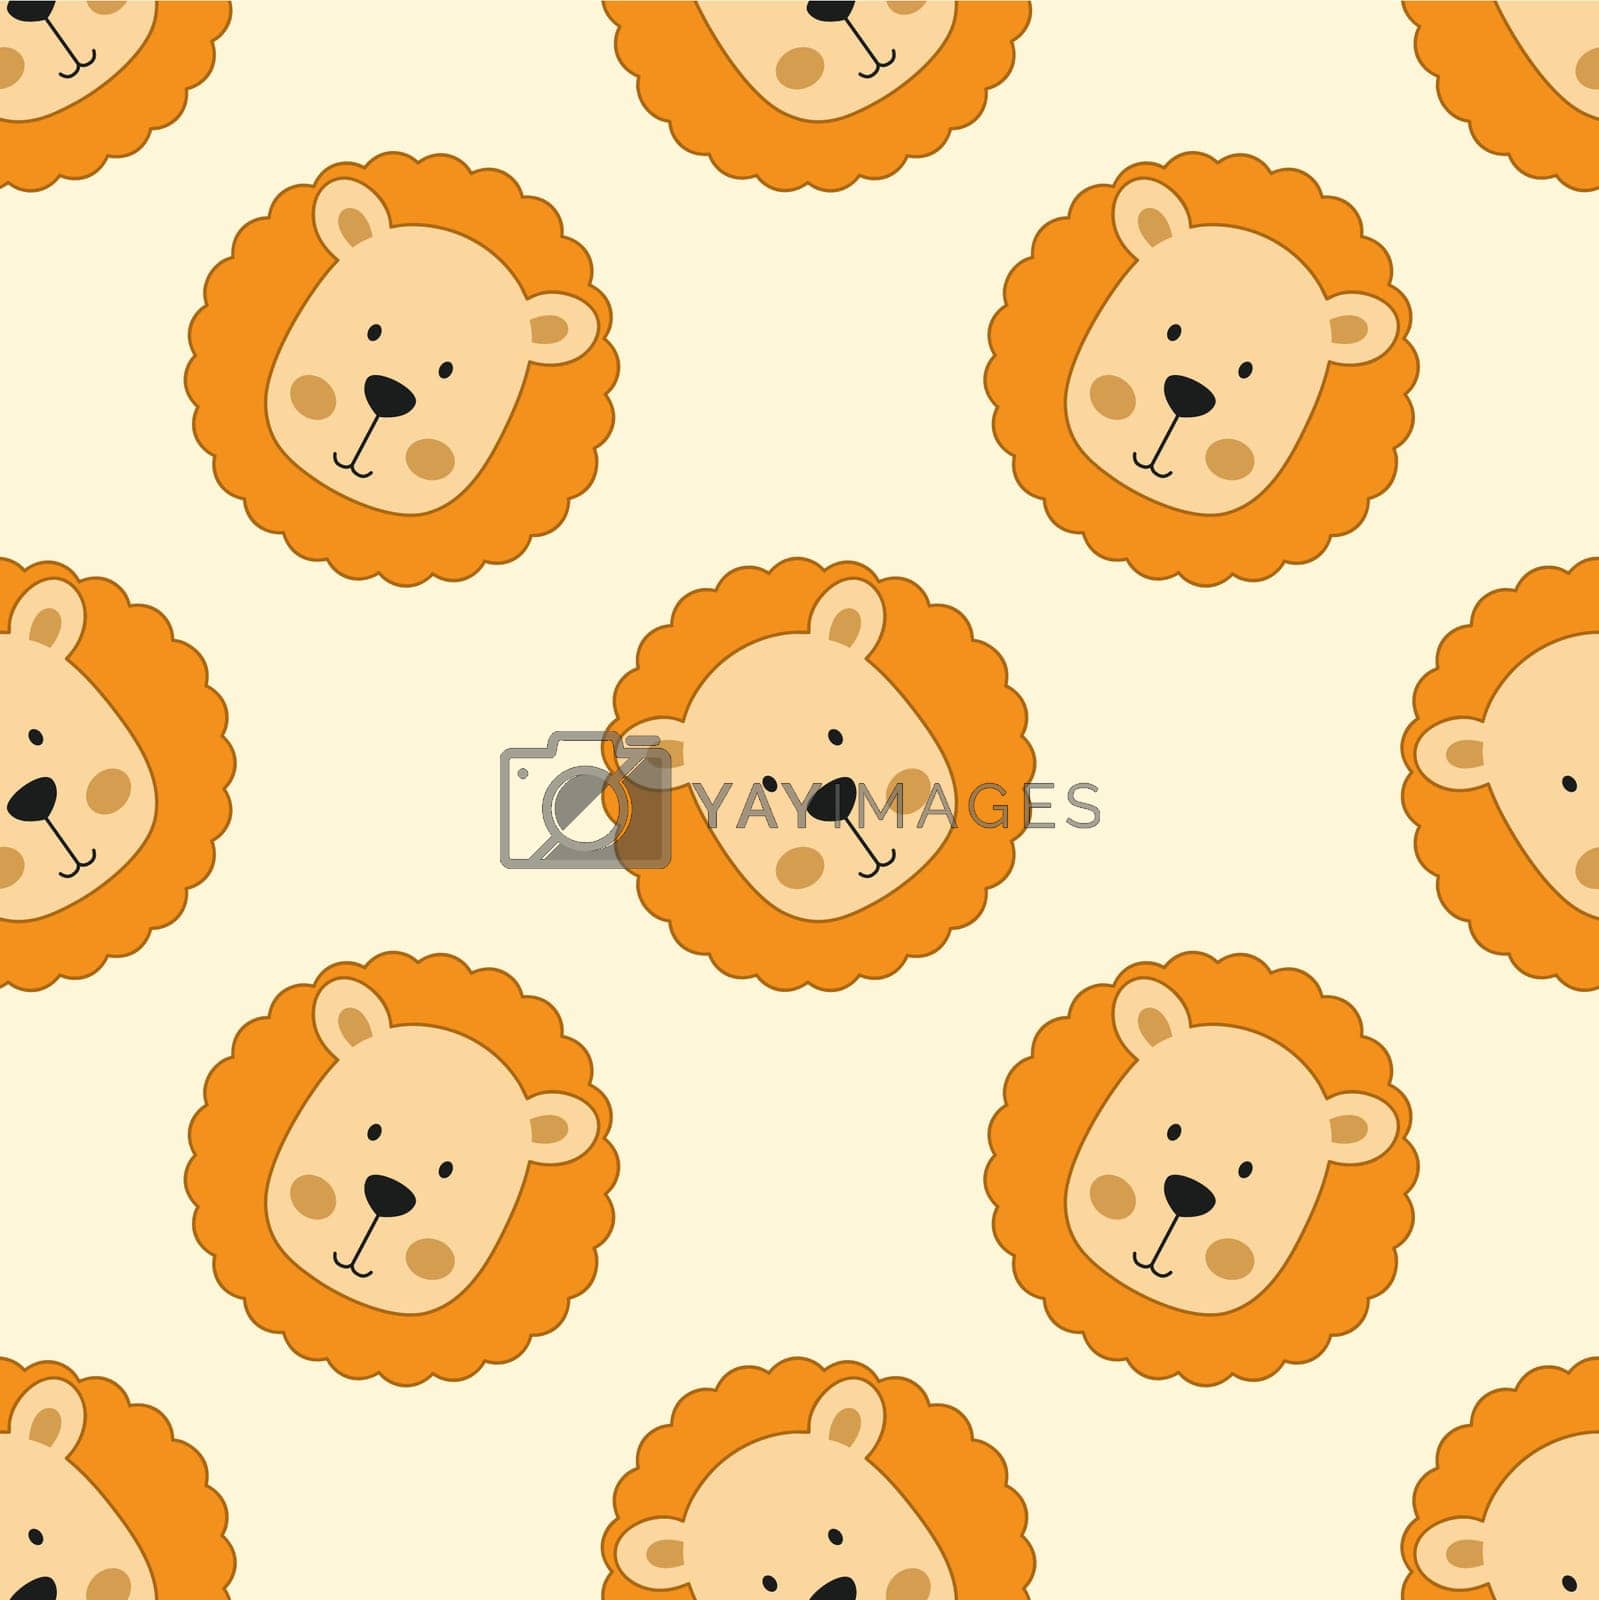 Royalty free image of Endless lion face pattern. Funny background with animals for sewing children clothes. Print wallpaper on fabric and packaging. by polinka_art